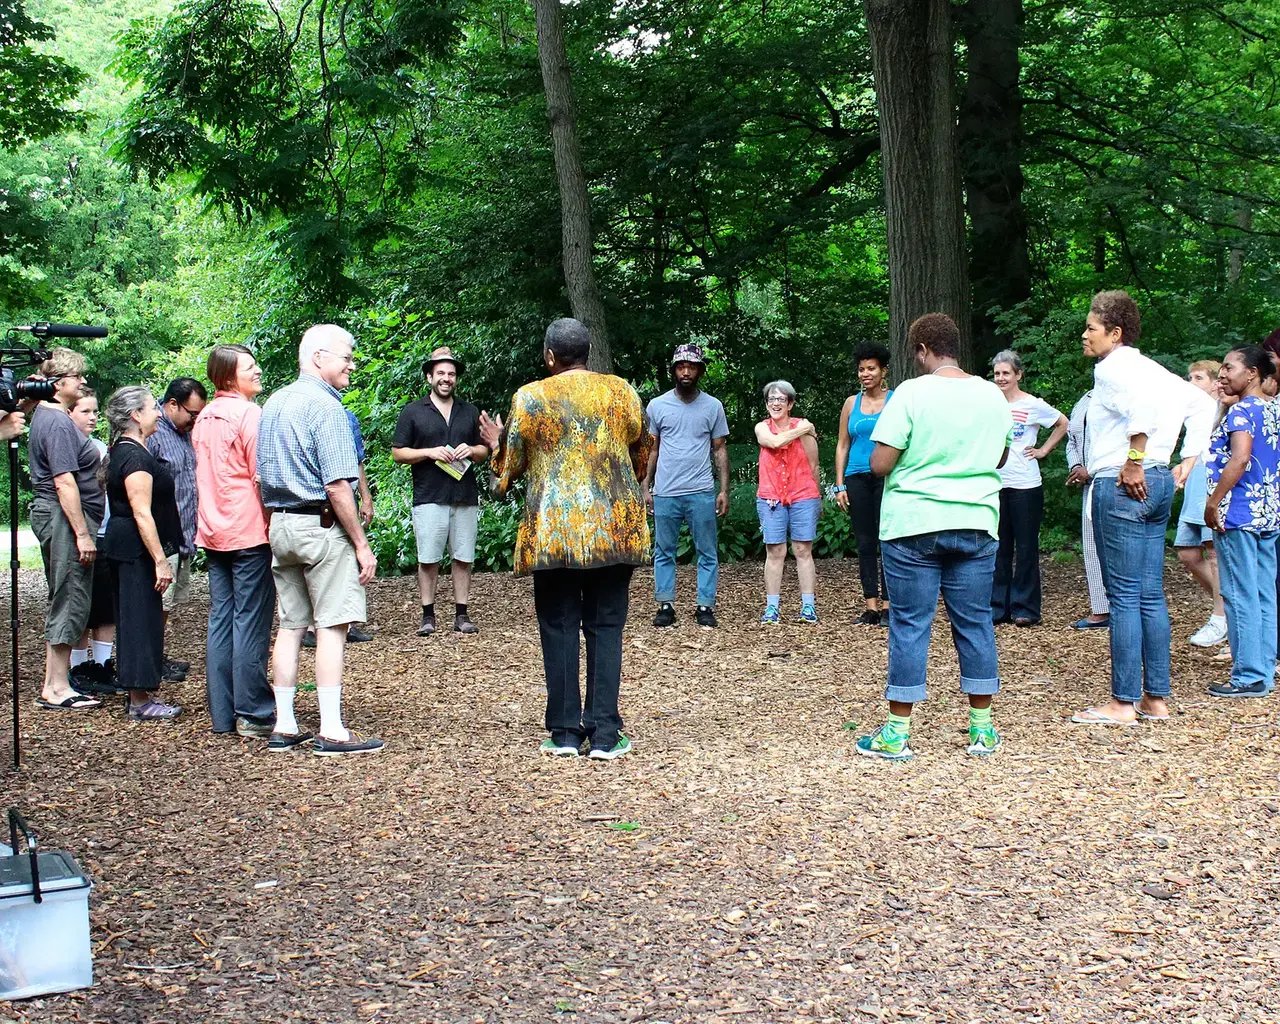 &ldquo;Pruning the Elephant&rdquo; workshop with Benjamin Volta. Photo by Jill Saul, courtesy of Historic Germantown.